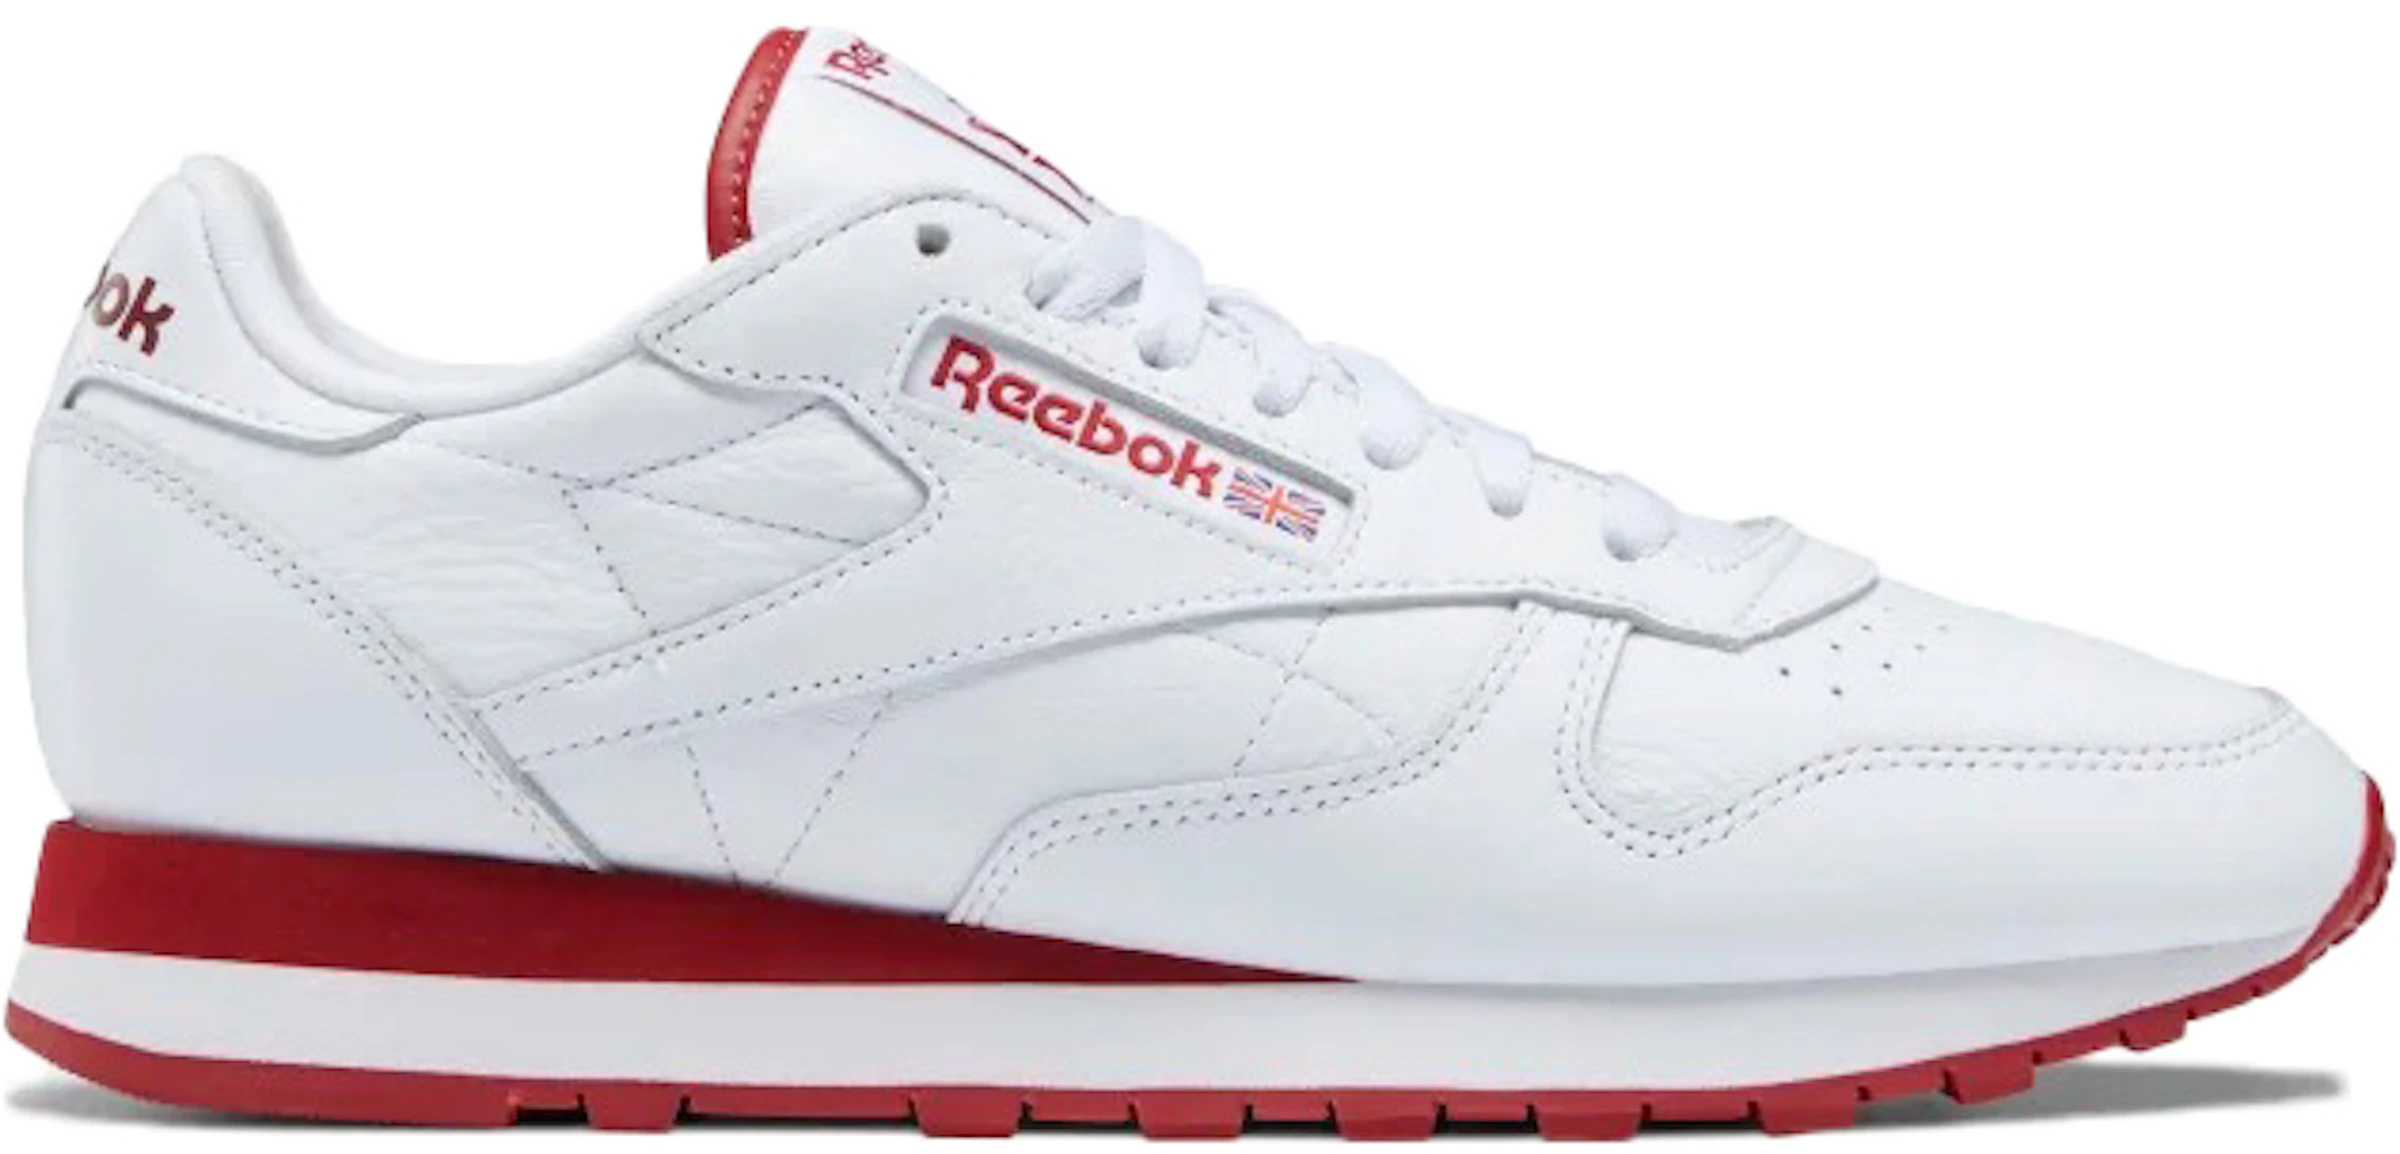 Reebok Classic Leather White Red - GW3329 - US